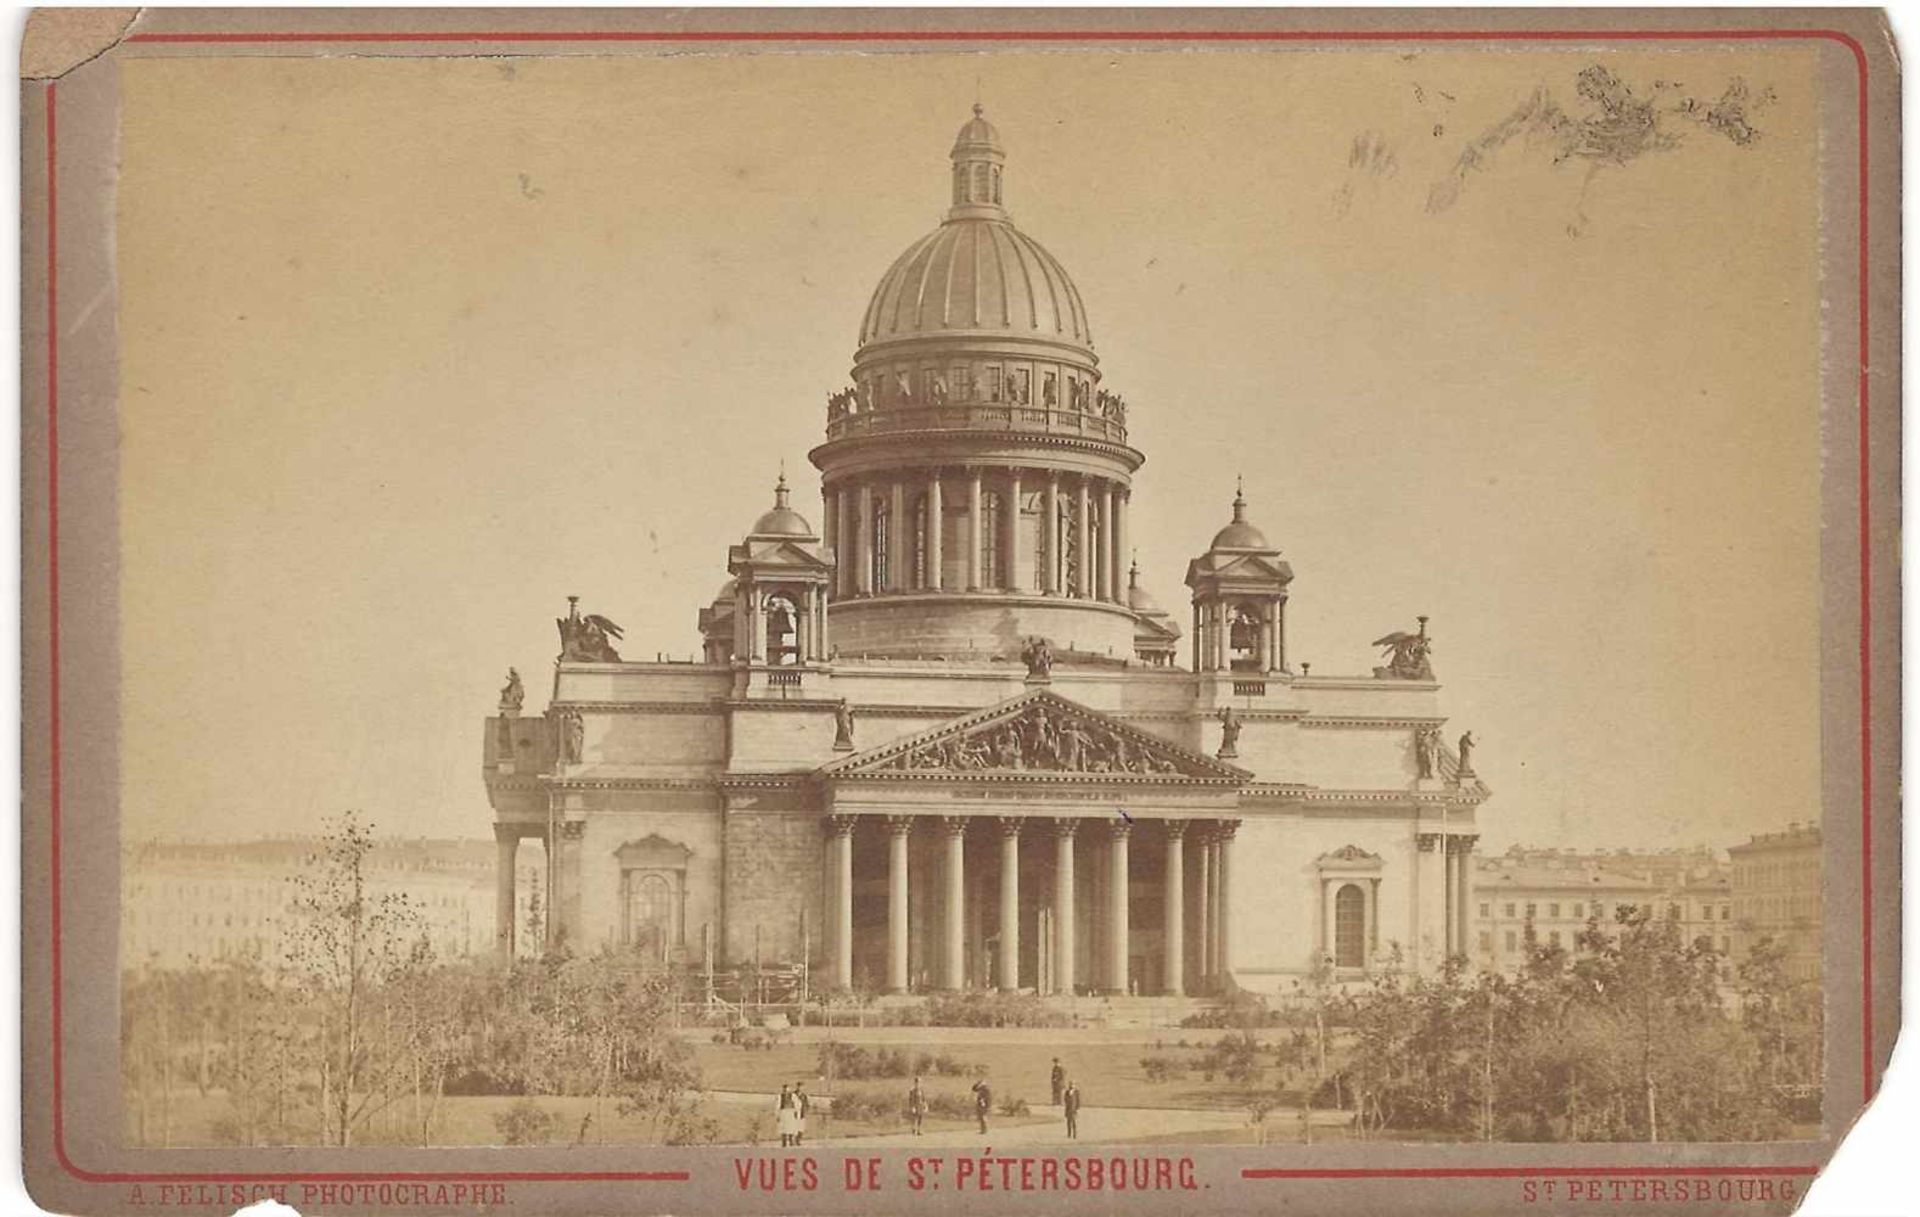 Six photographs with the views of St. Petersburg. 1883. - 11x16.7 cm.Russia. The inscription under